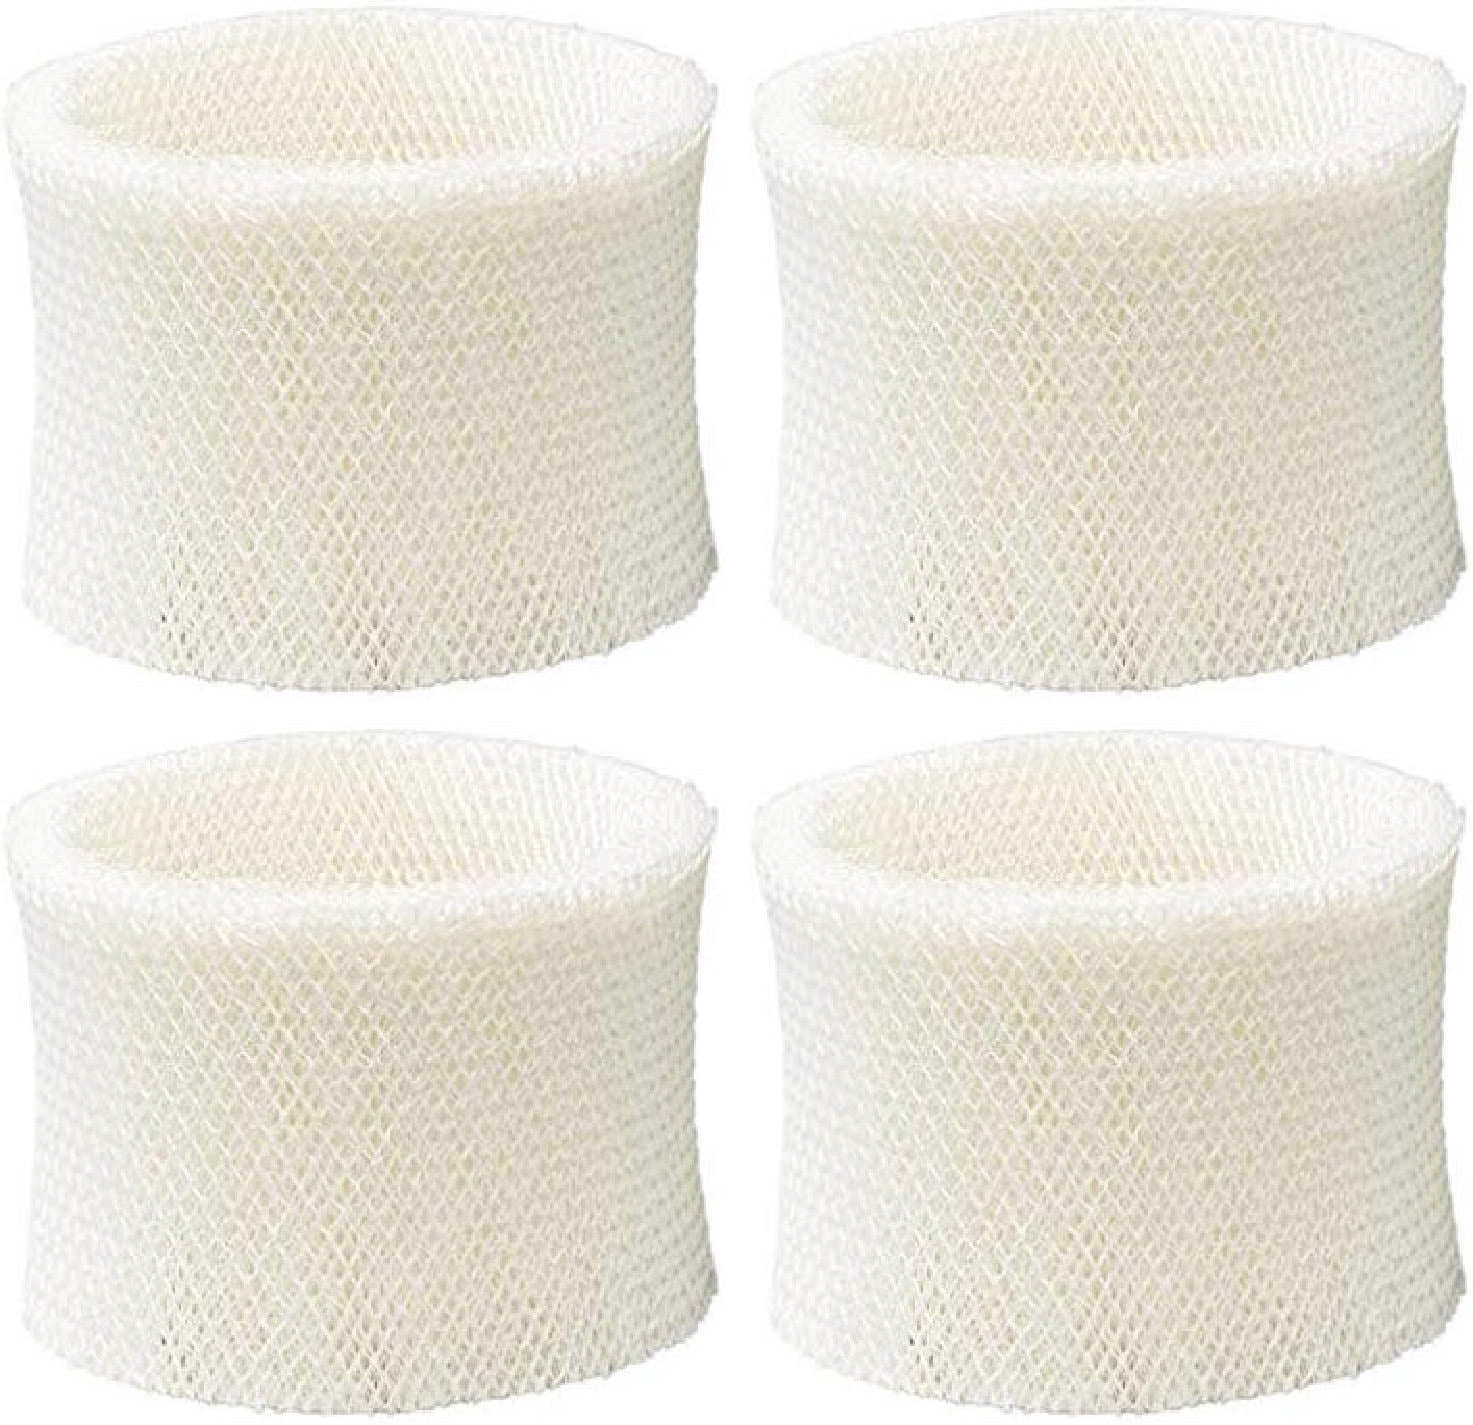 HM1895 SCM1866 SCM1895 Nispira 4 Packs Holmes Type C Filter HWF65 HWF65PDQ-U Compatible Humidifier Wick Filter Replacement Fits HM1865